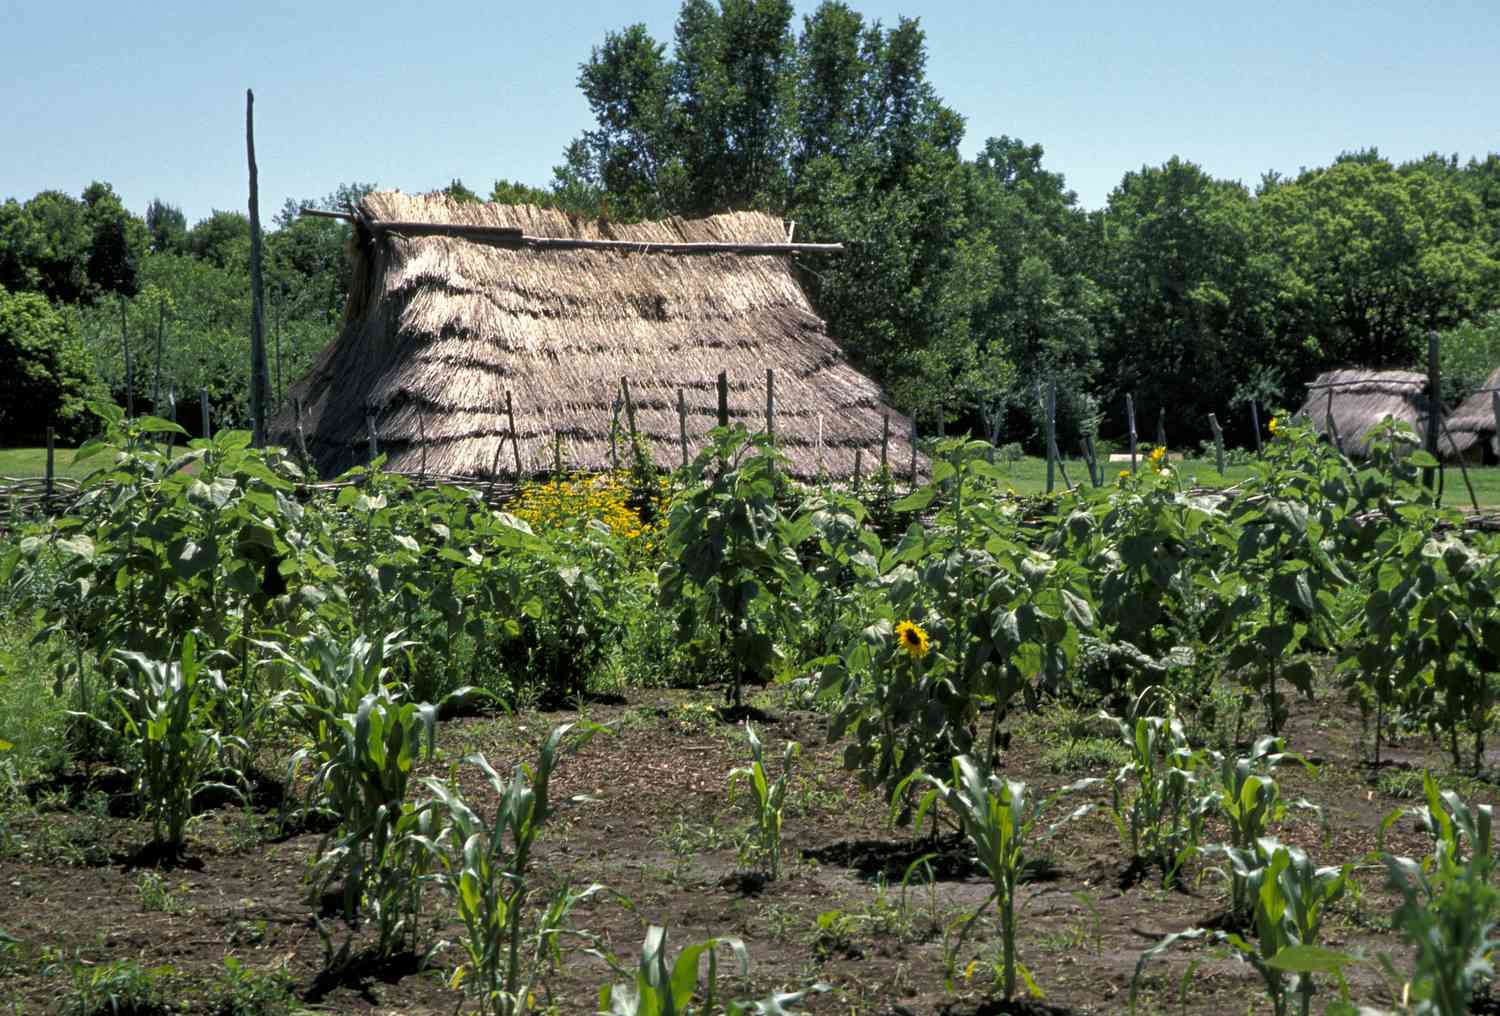 When Did Crop Rotation Start In The U.S.?